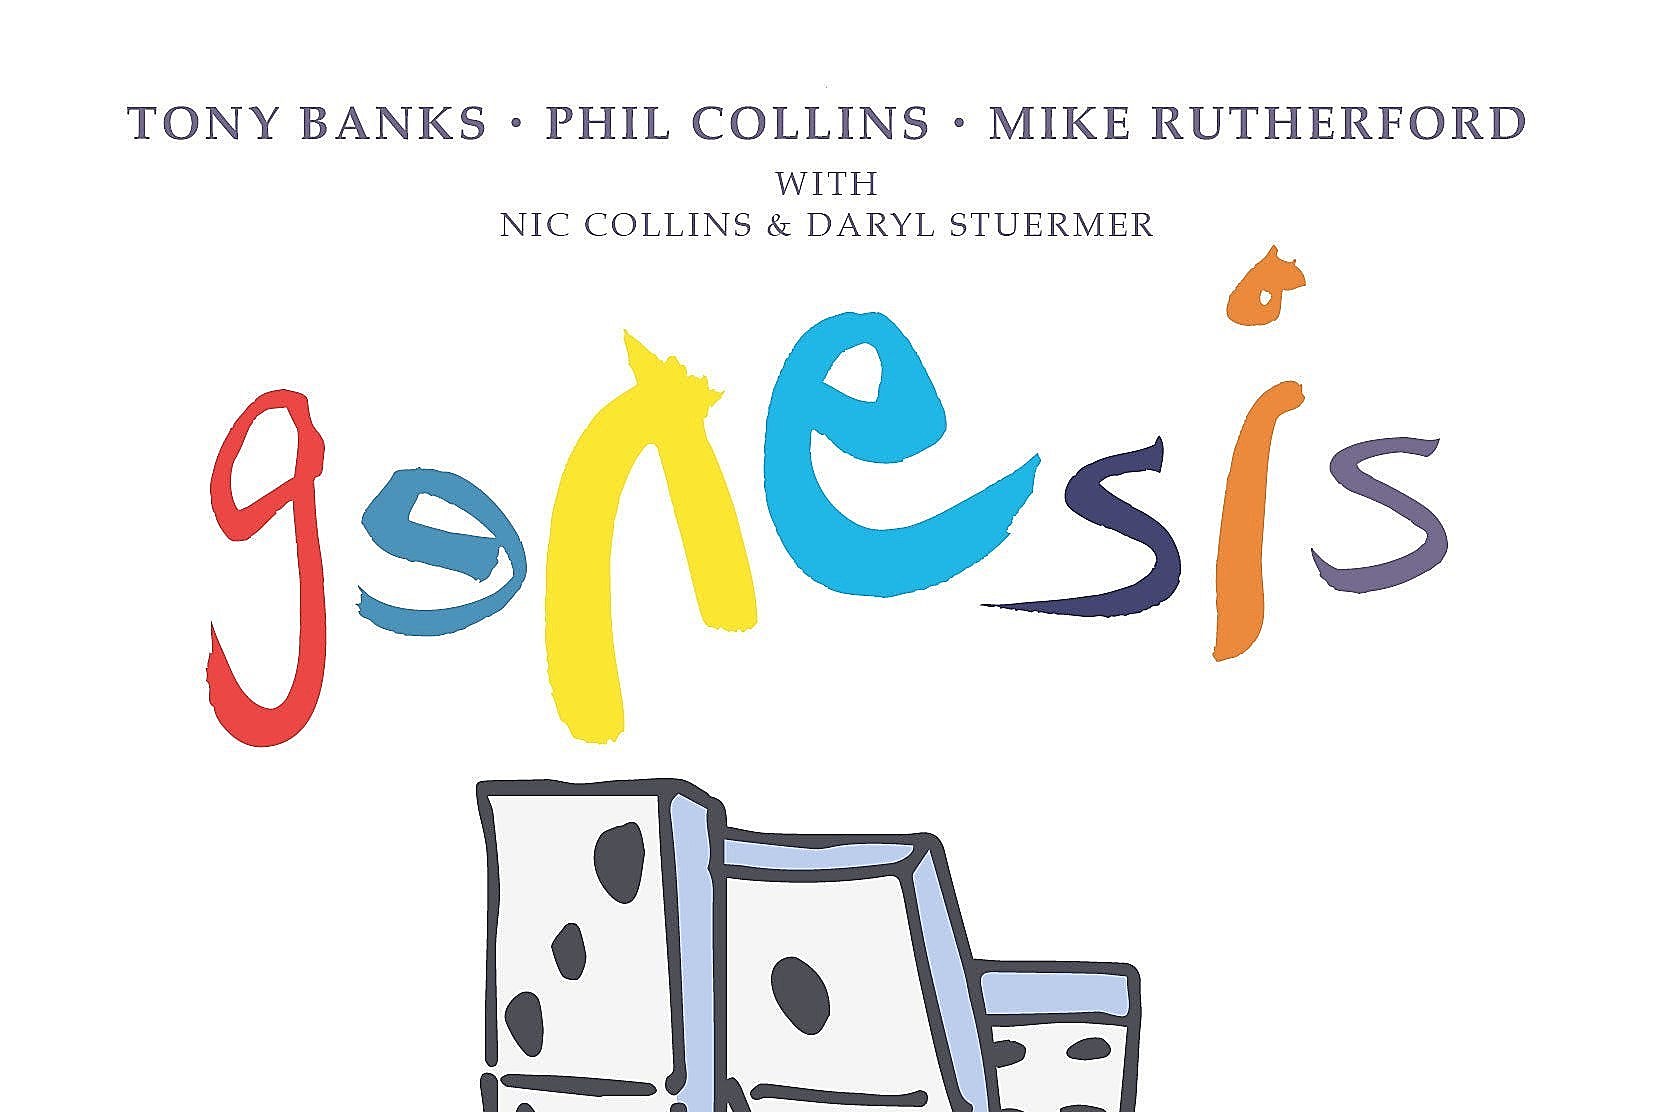 Genesis played MSG and UBS Arena on ‘Last Domino?’ Tour (pics, setlist